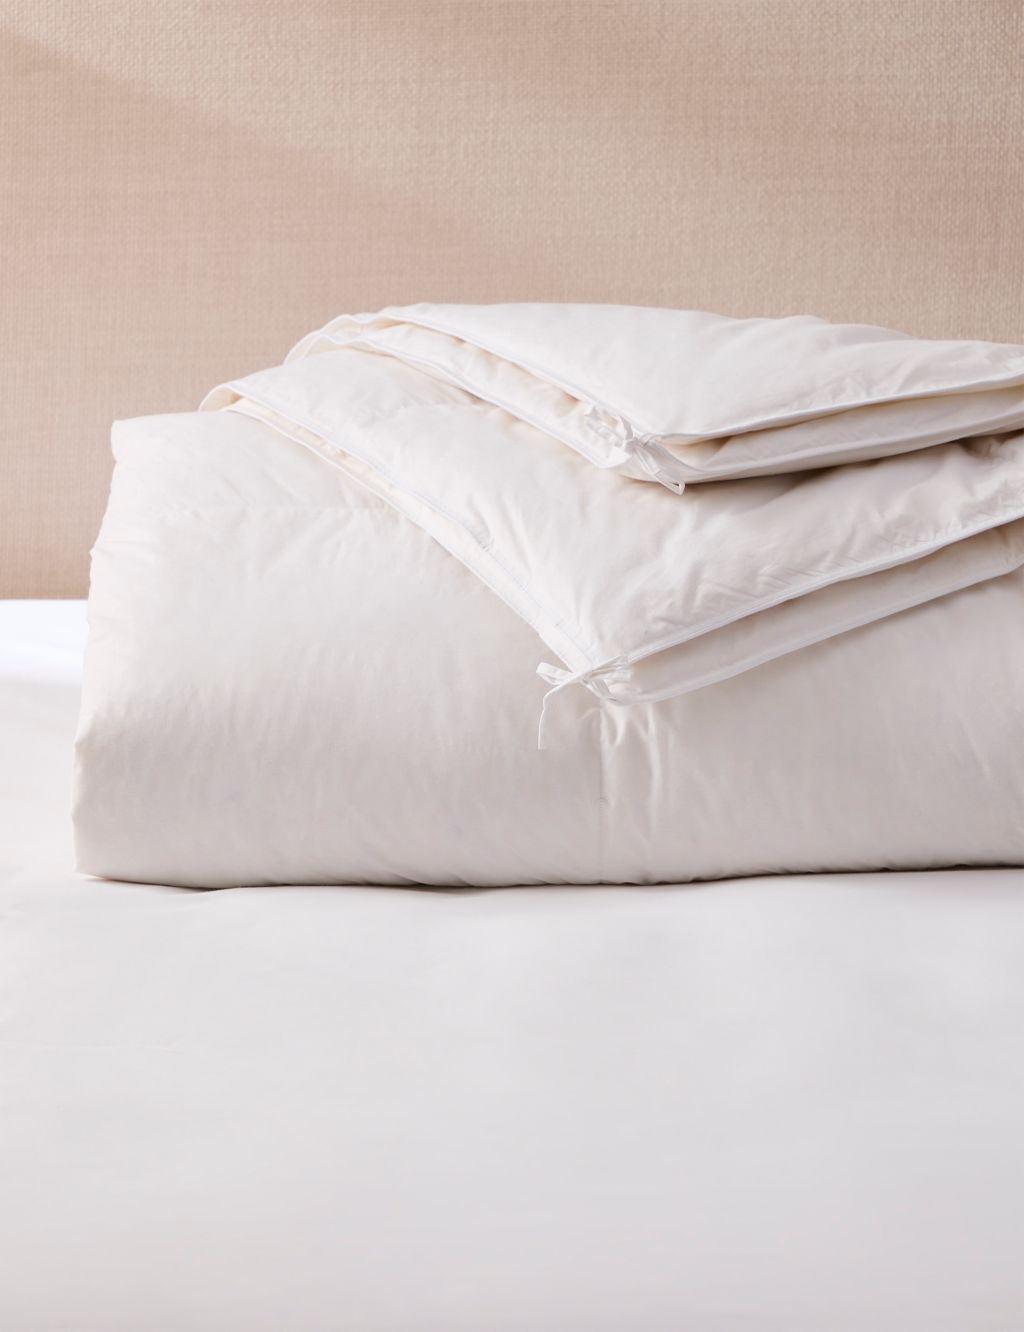 Duck Feather & Down 13.5 Tog All Season Duvet image 1